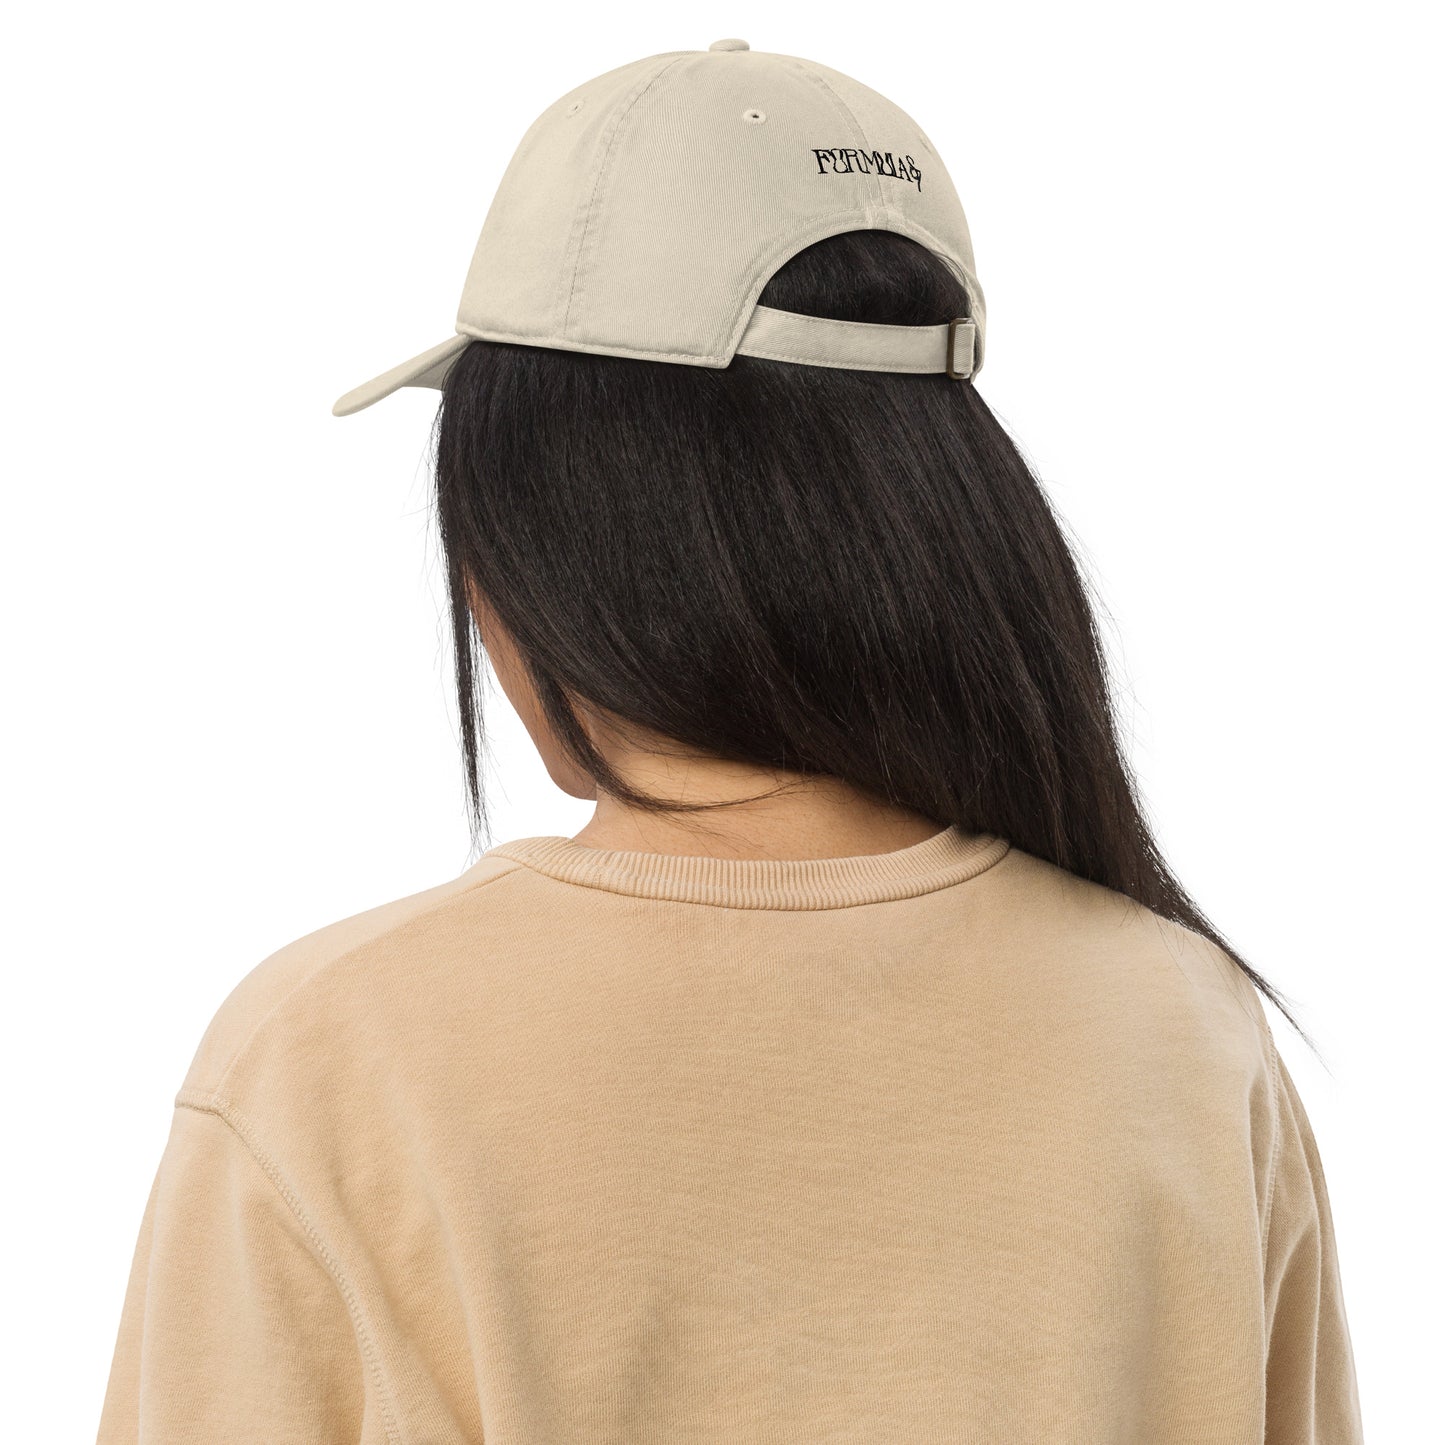 Guided Divinely Organic Cotton dad hat